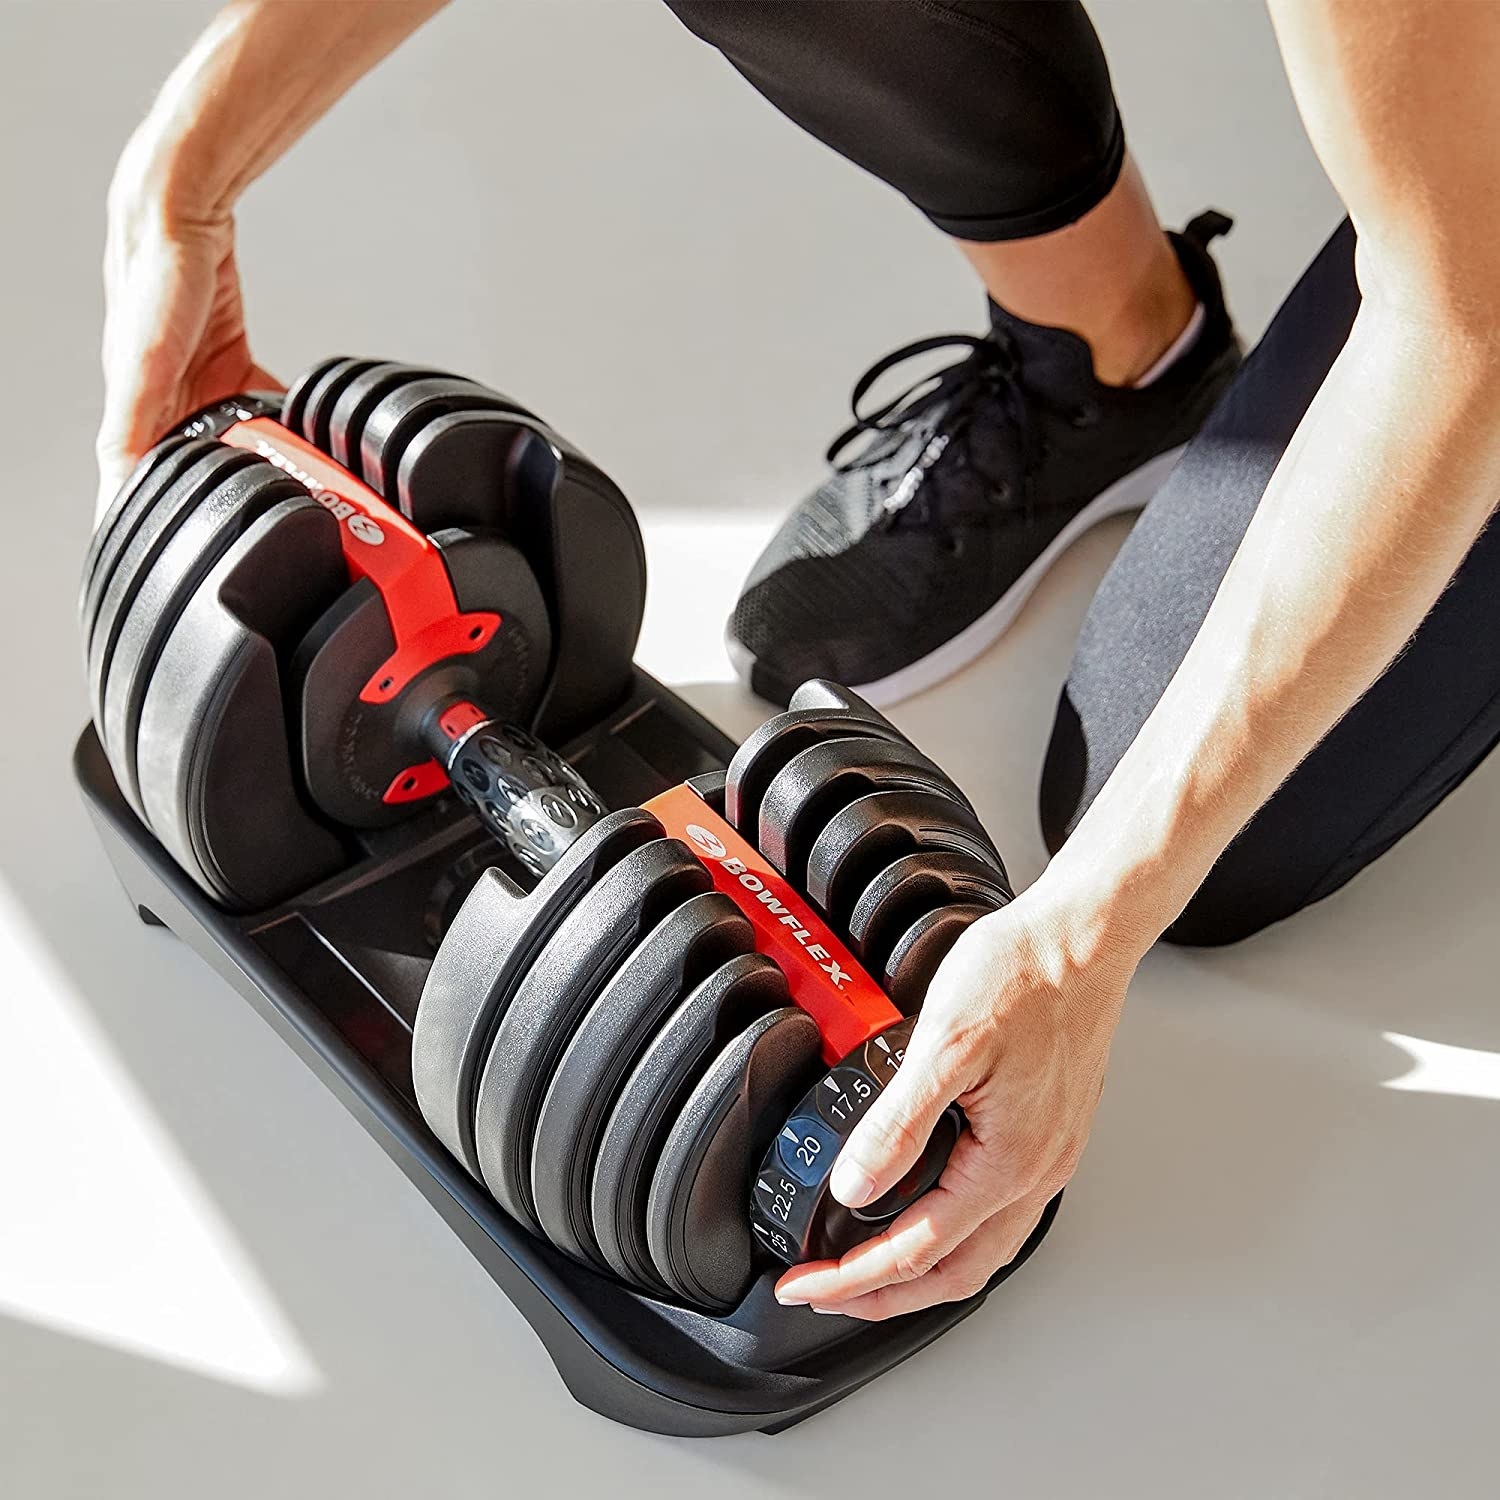 A person putting a dumbbell into its case